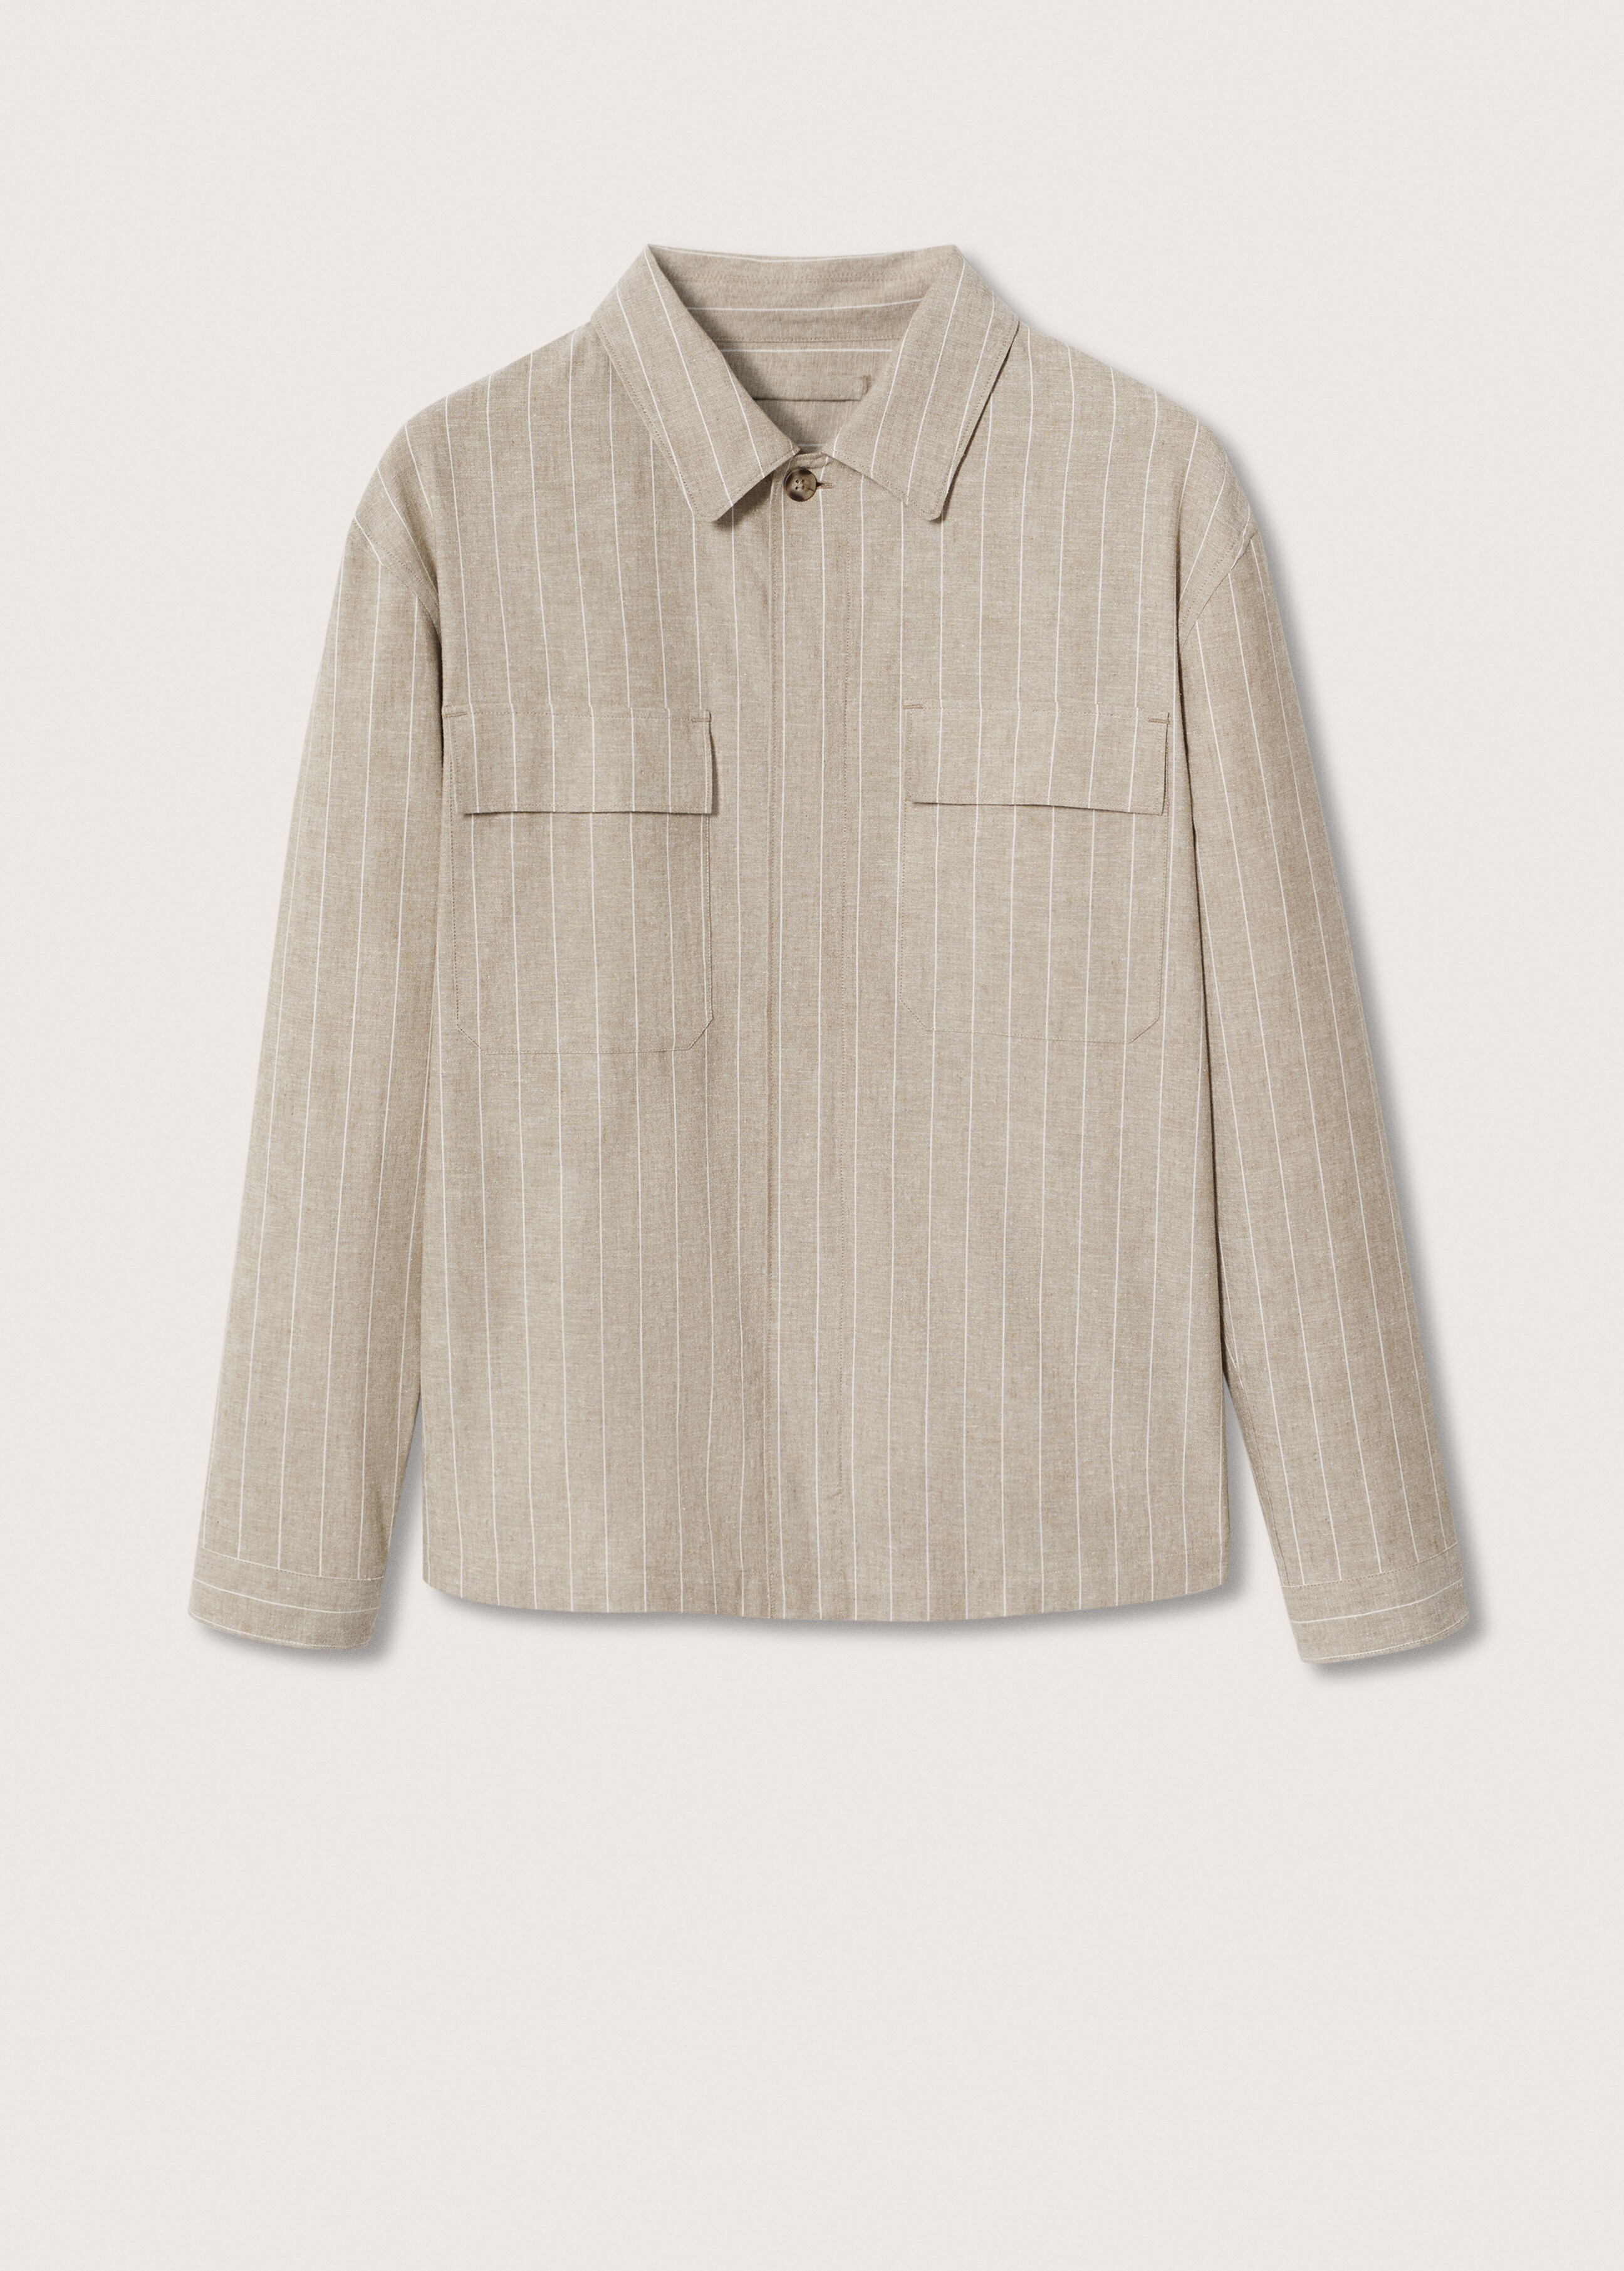 Striped cotton linen overshirt - Article without model